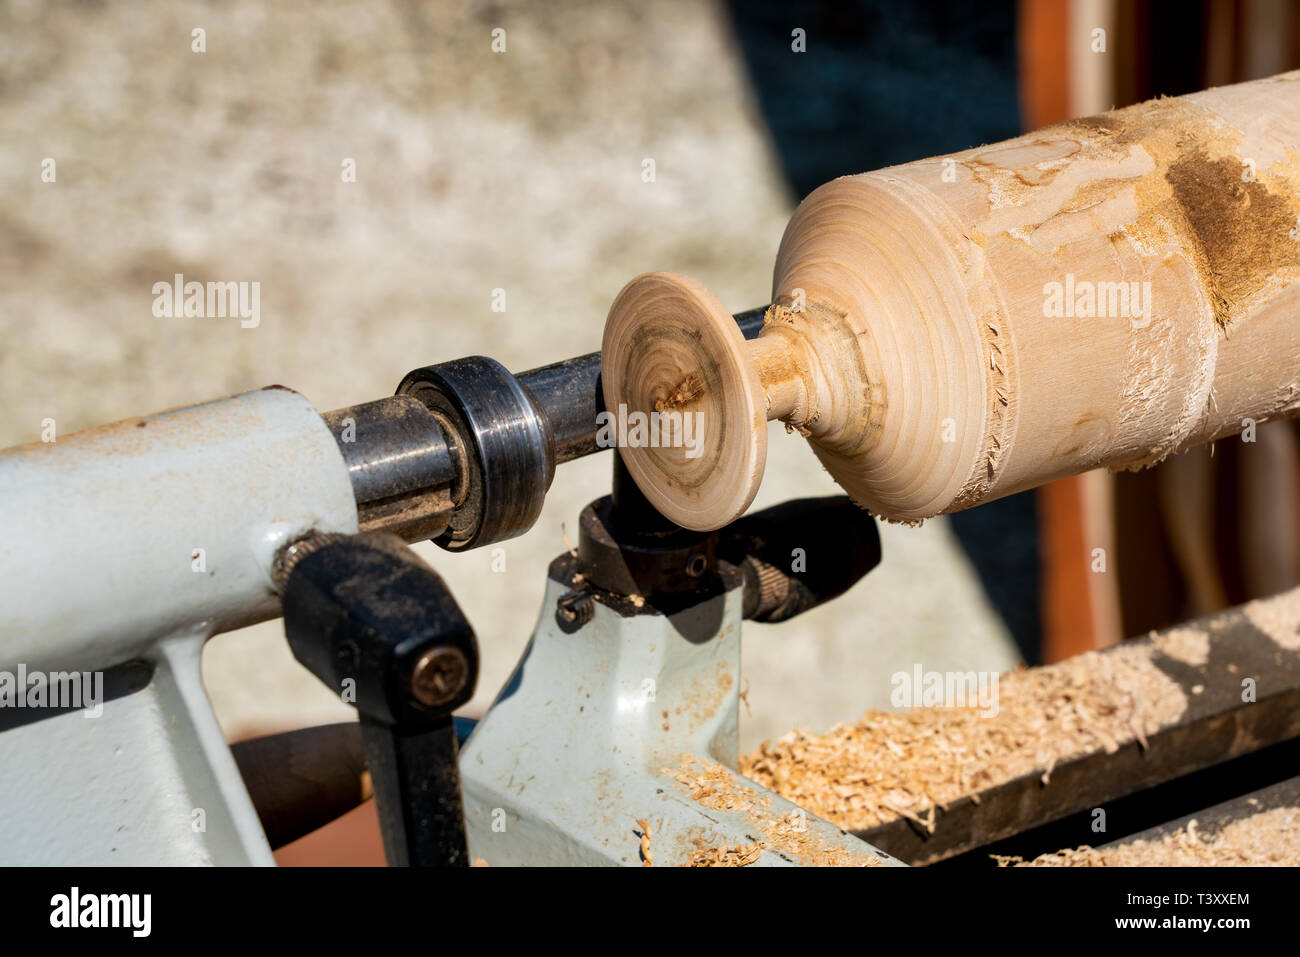 Carving a banister pillar in wood-turning lathe Stock Photo